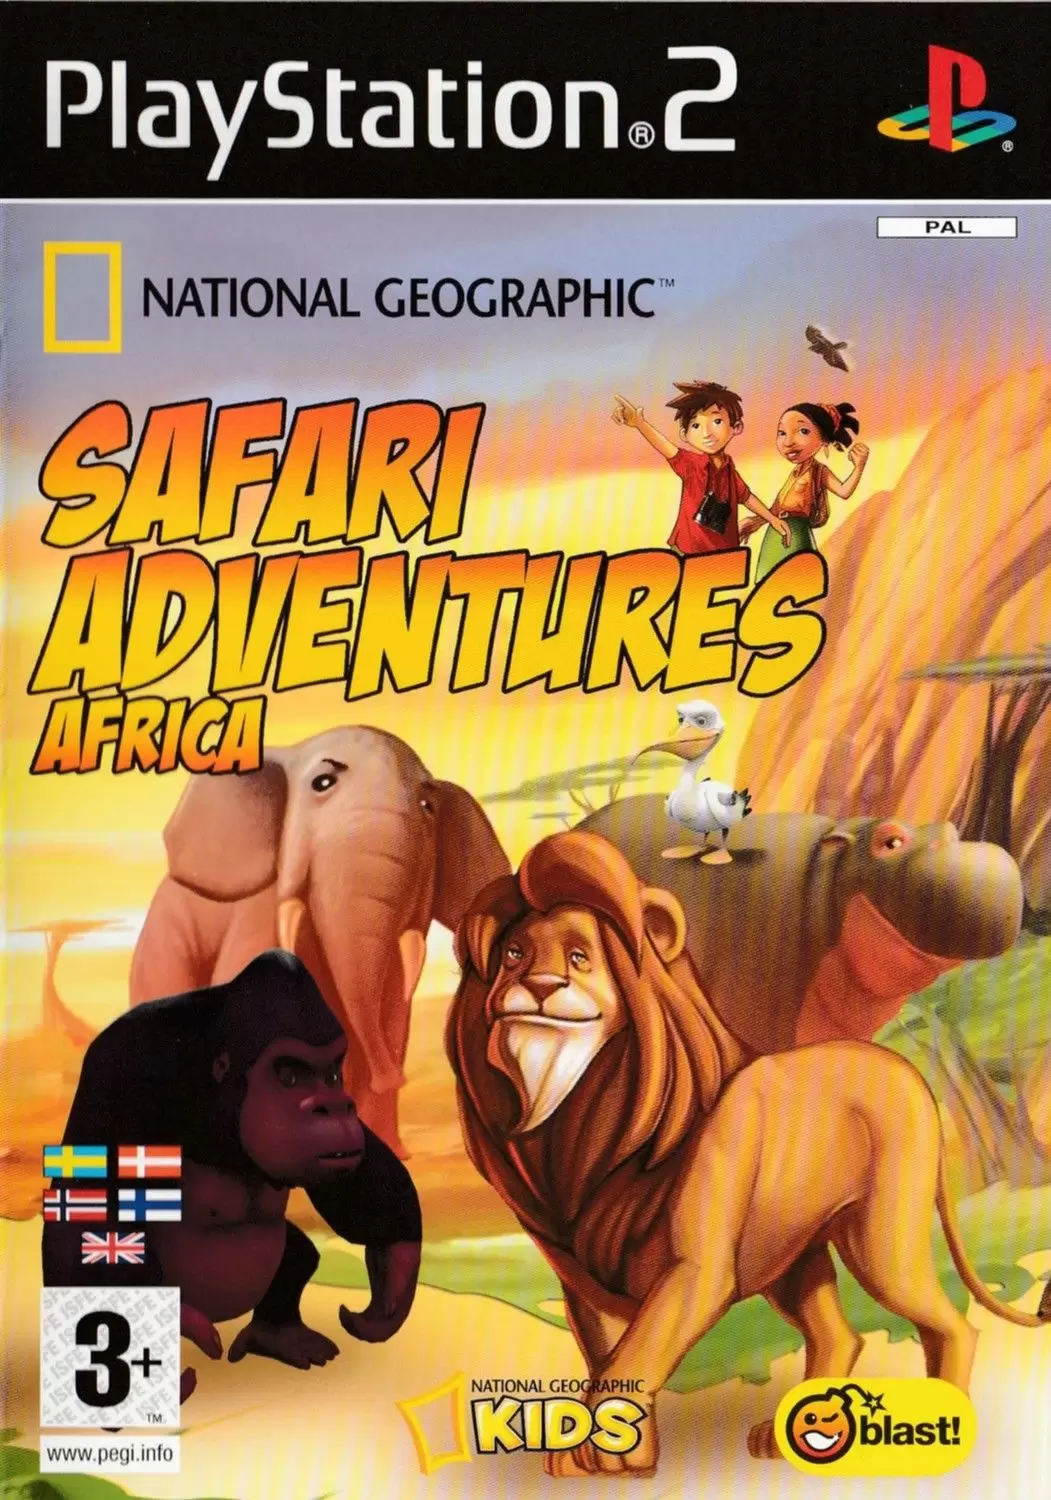 PS2 Games - National Geographic: Safari Adventures Africa